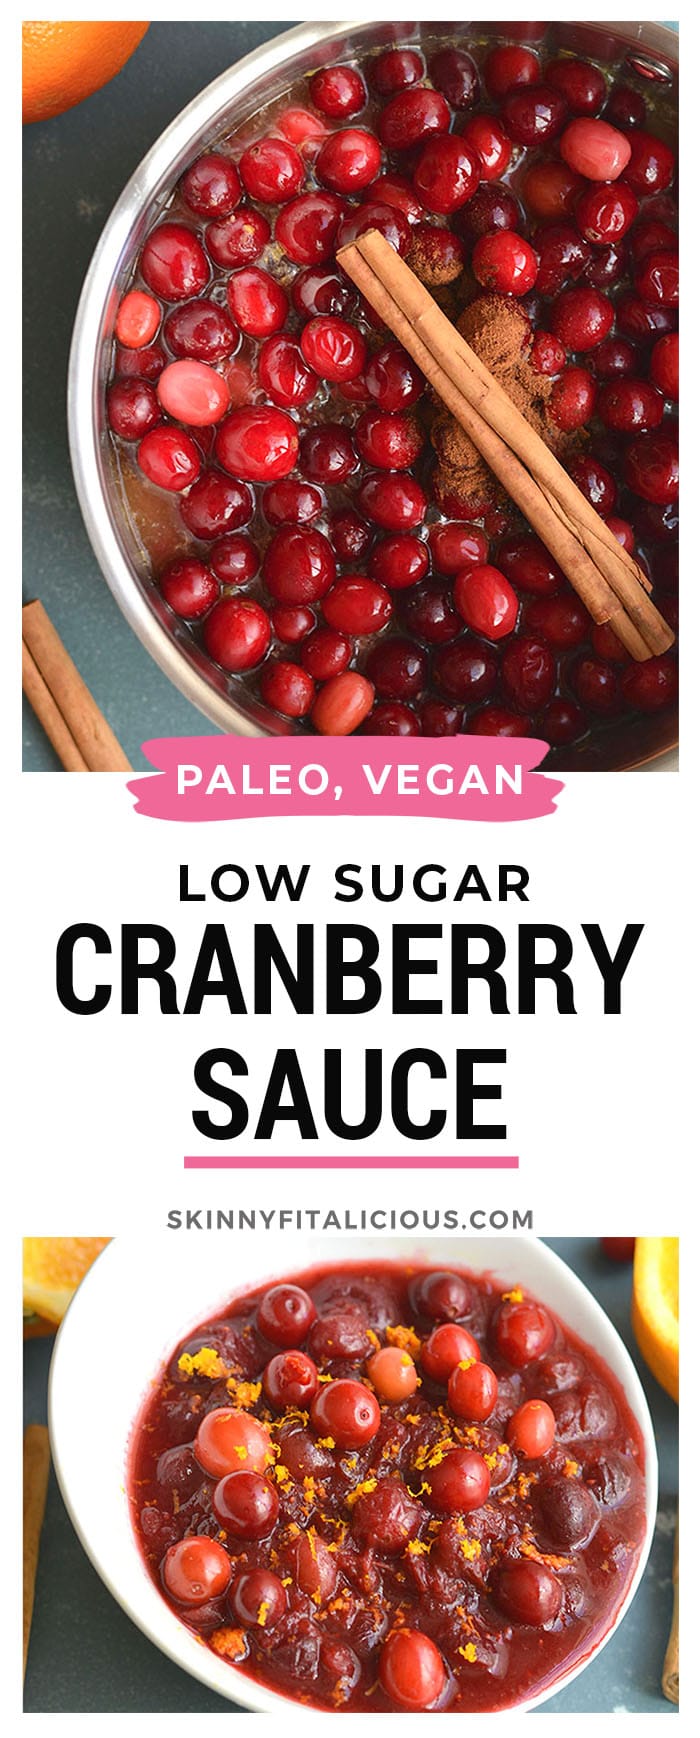 Homemade Sugar Free Cranberry Sauce naturally sweetened with oranges and spices. Easy, warm, filling! Gluten Free + Paleo + Vegan + Low Calorie